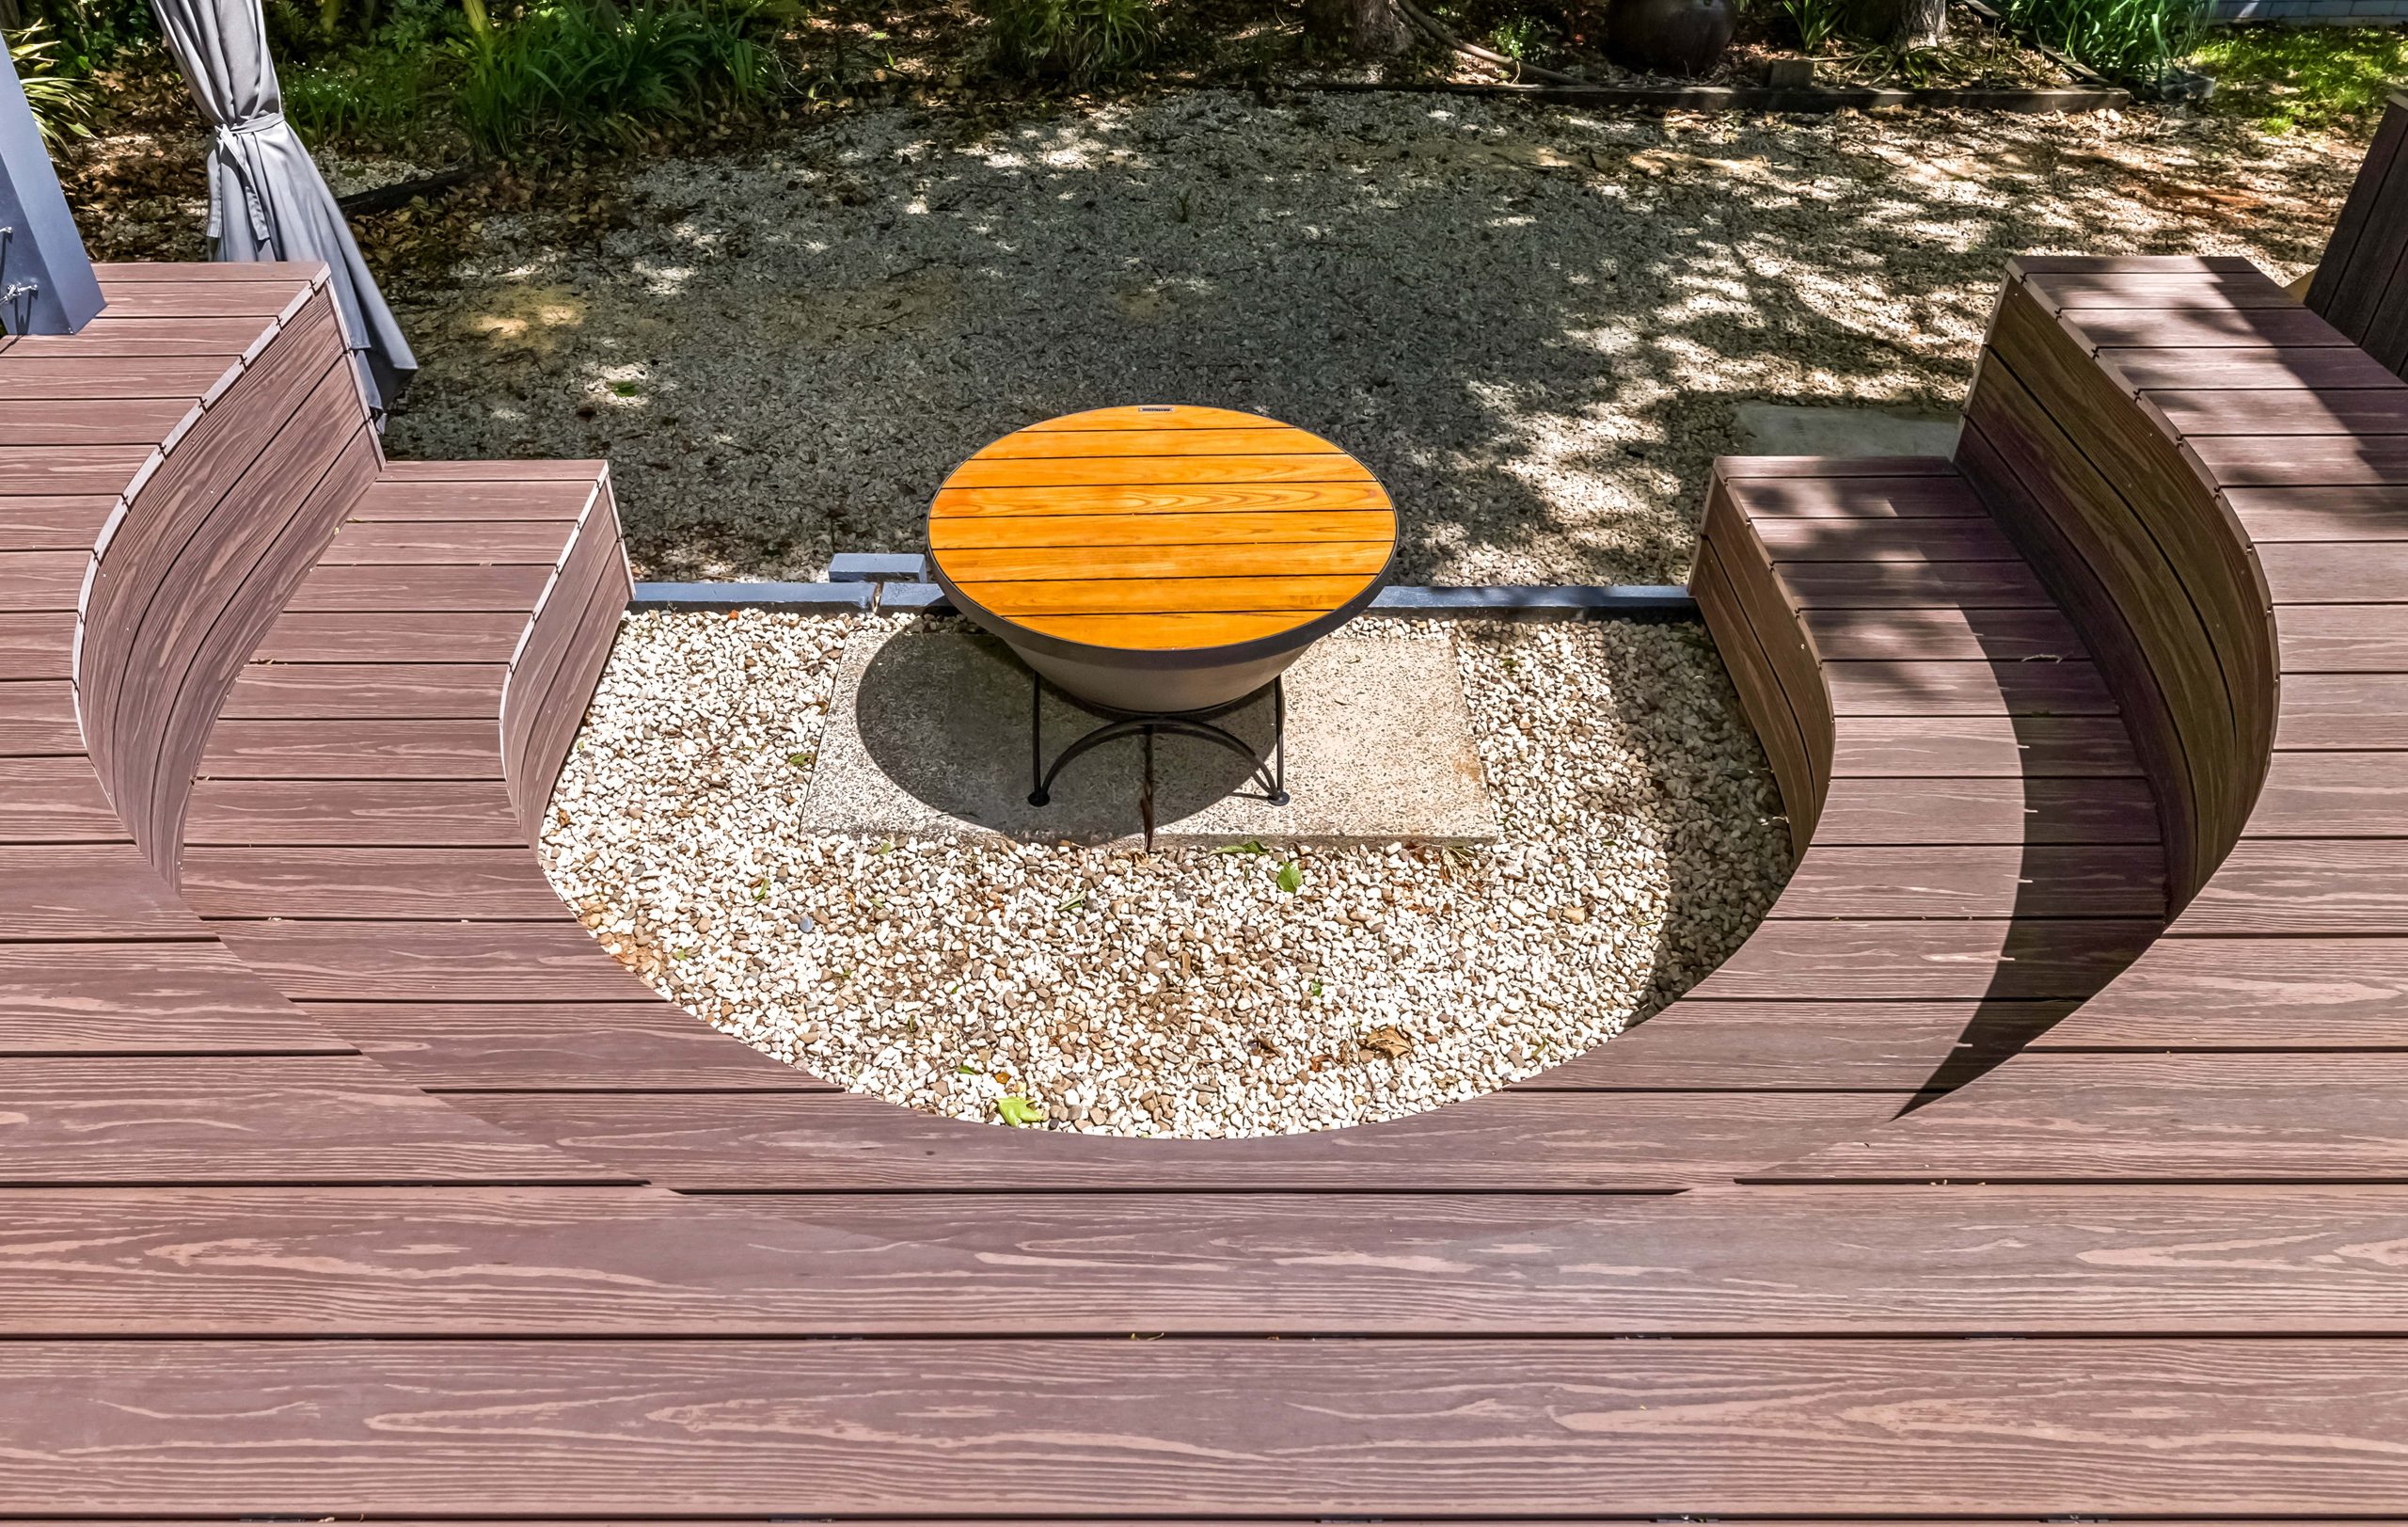 A U-shaped deck section, creating seating and room for BBQ